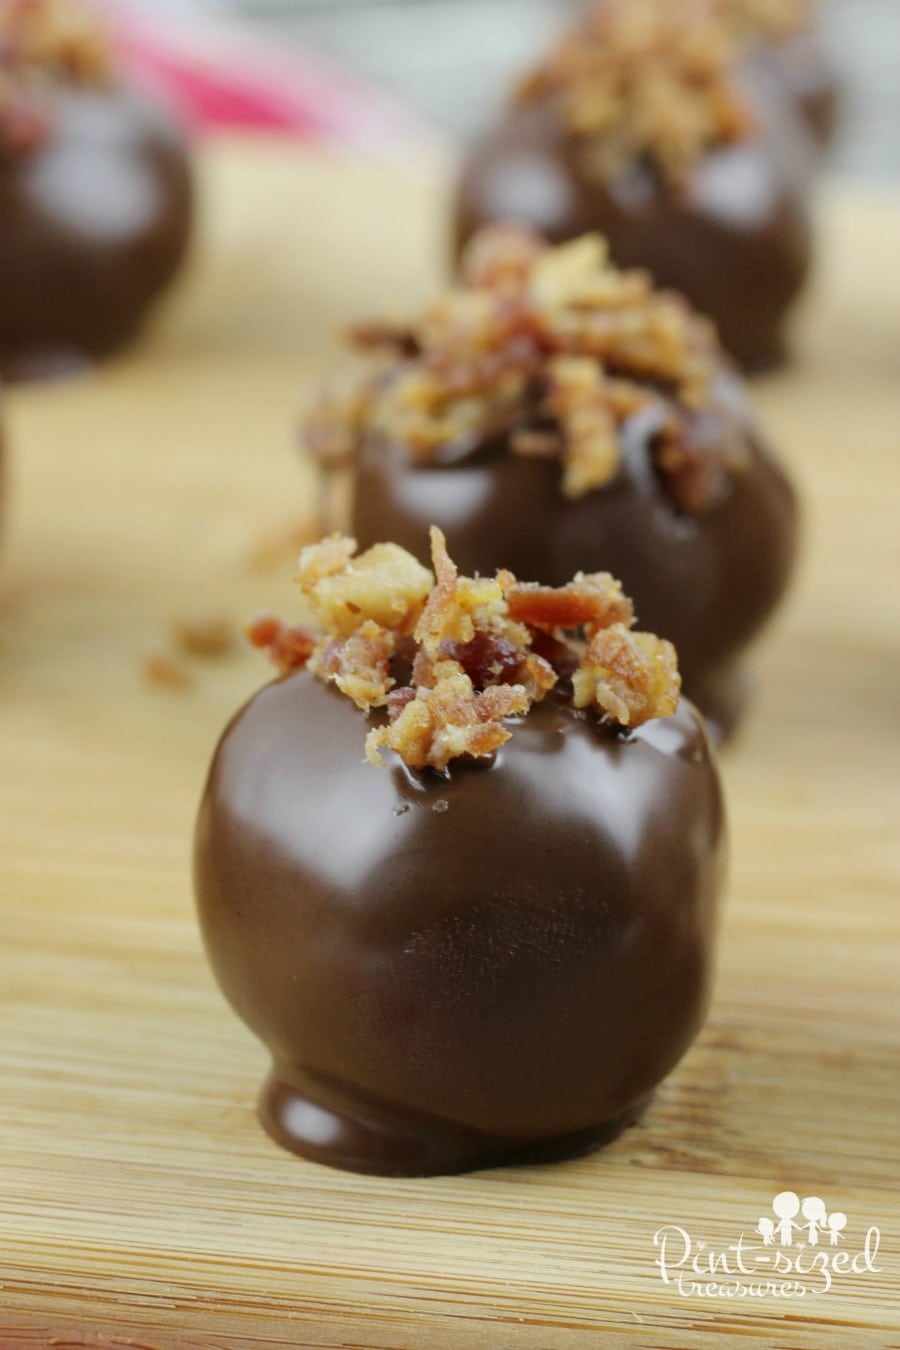 Easy maple bacon truffles that will unite chocolate AND bacon lovers!